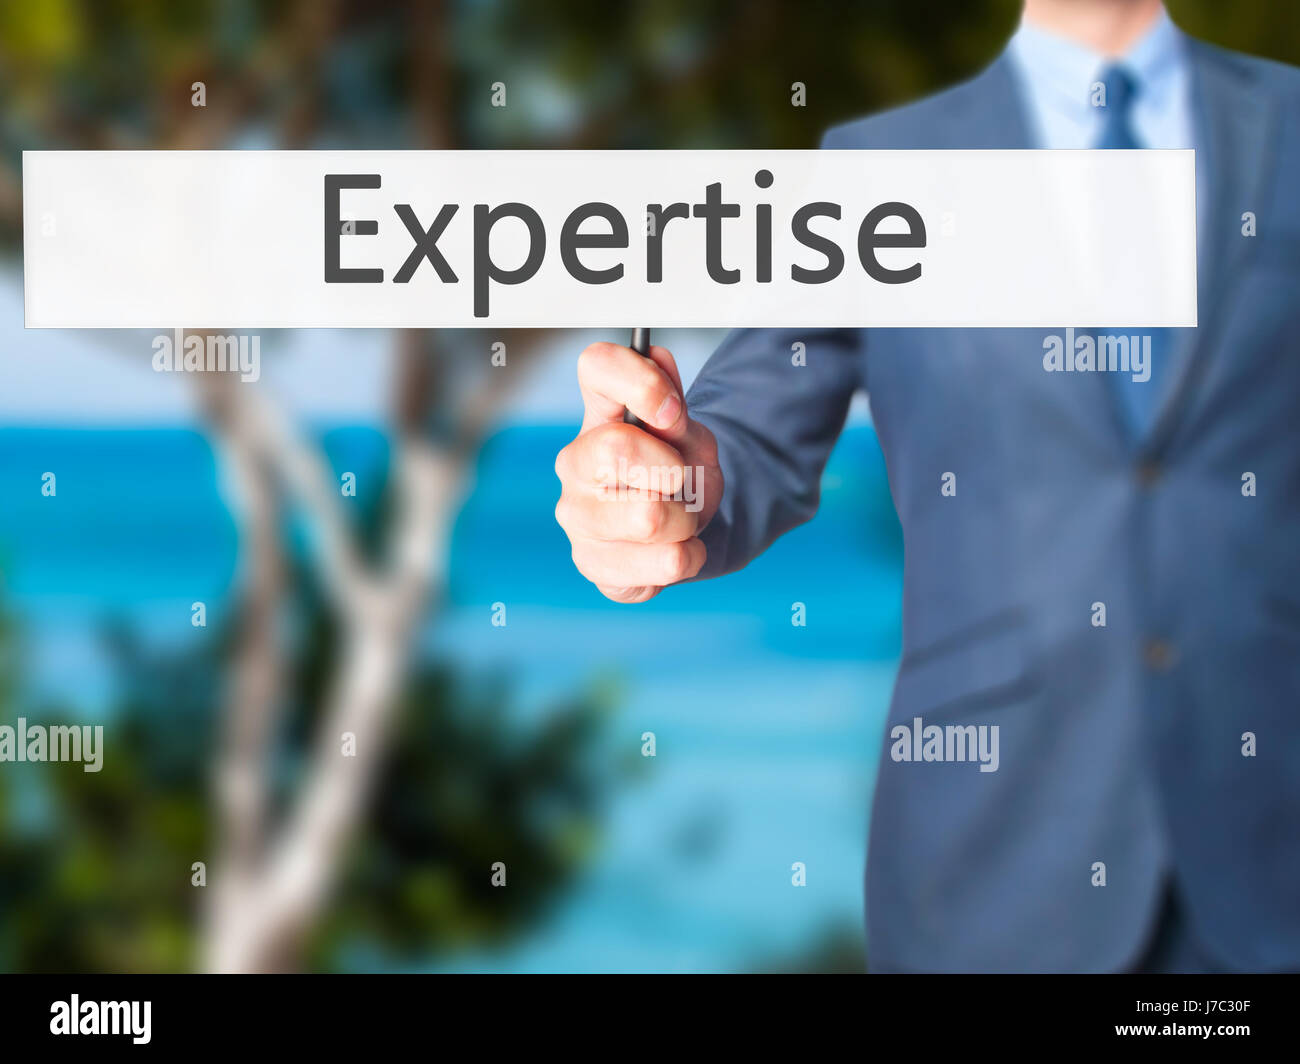 Expertise - Businessman hand holding sign. Business, technology, internet concept. Stock Photo Stock Photo